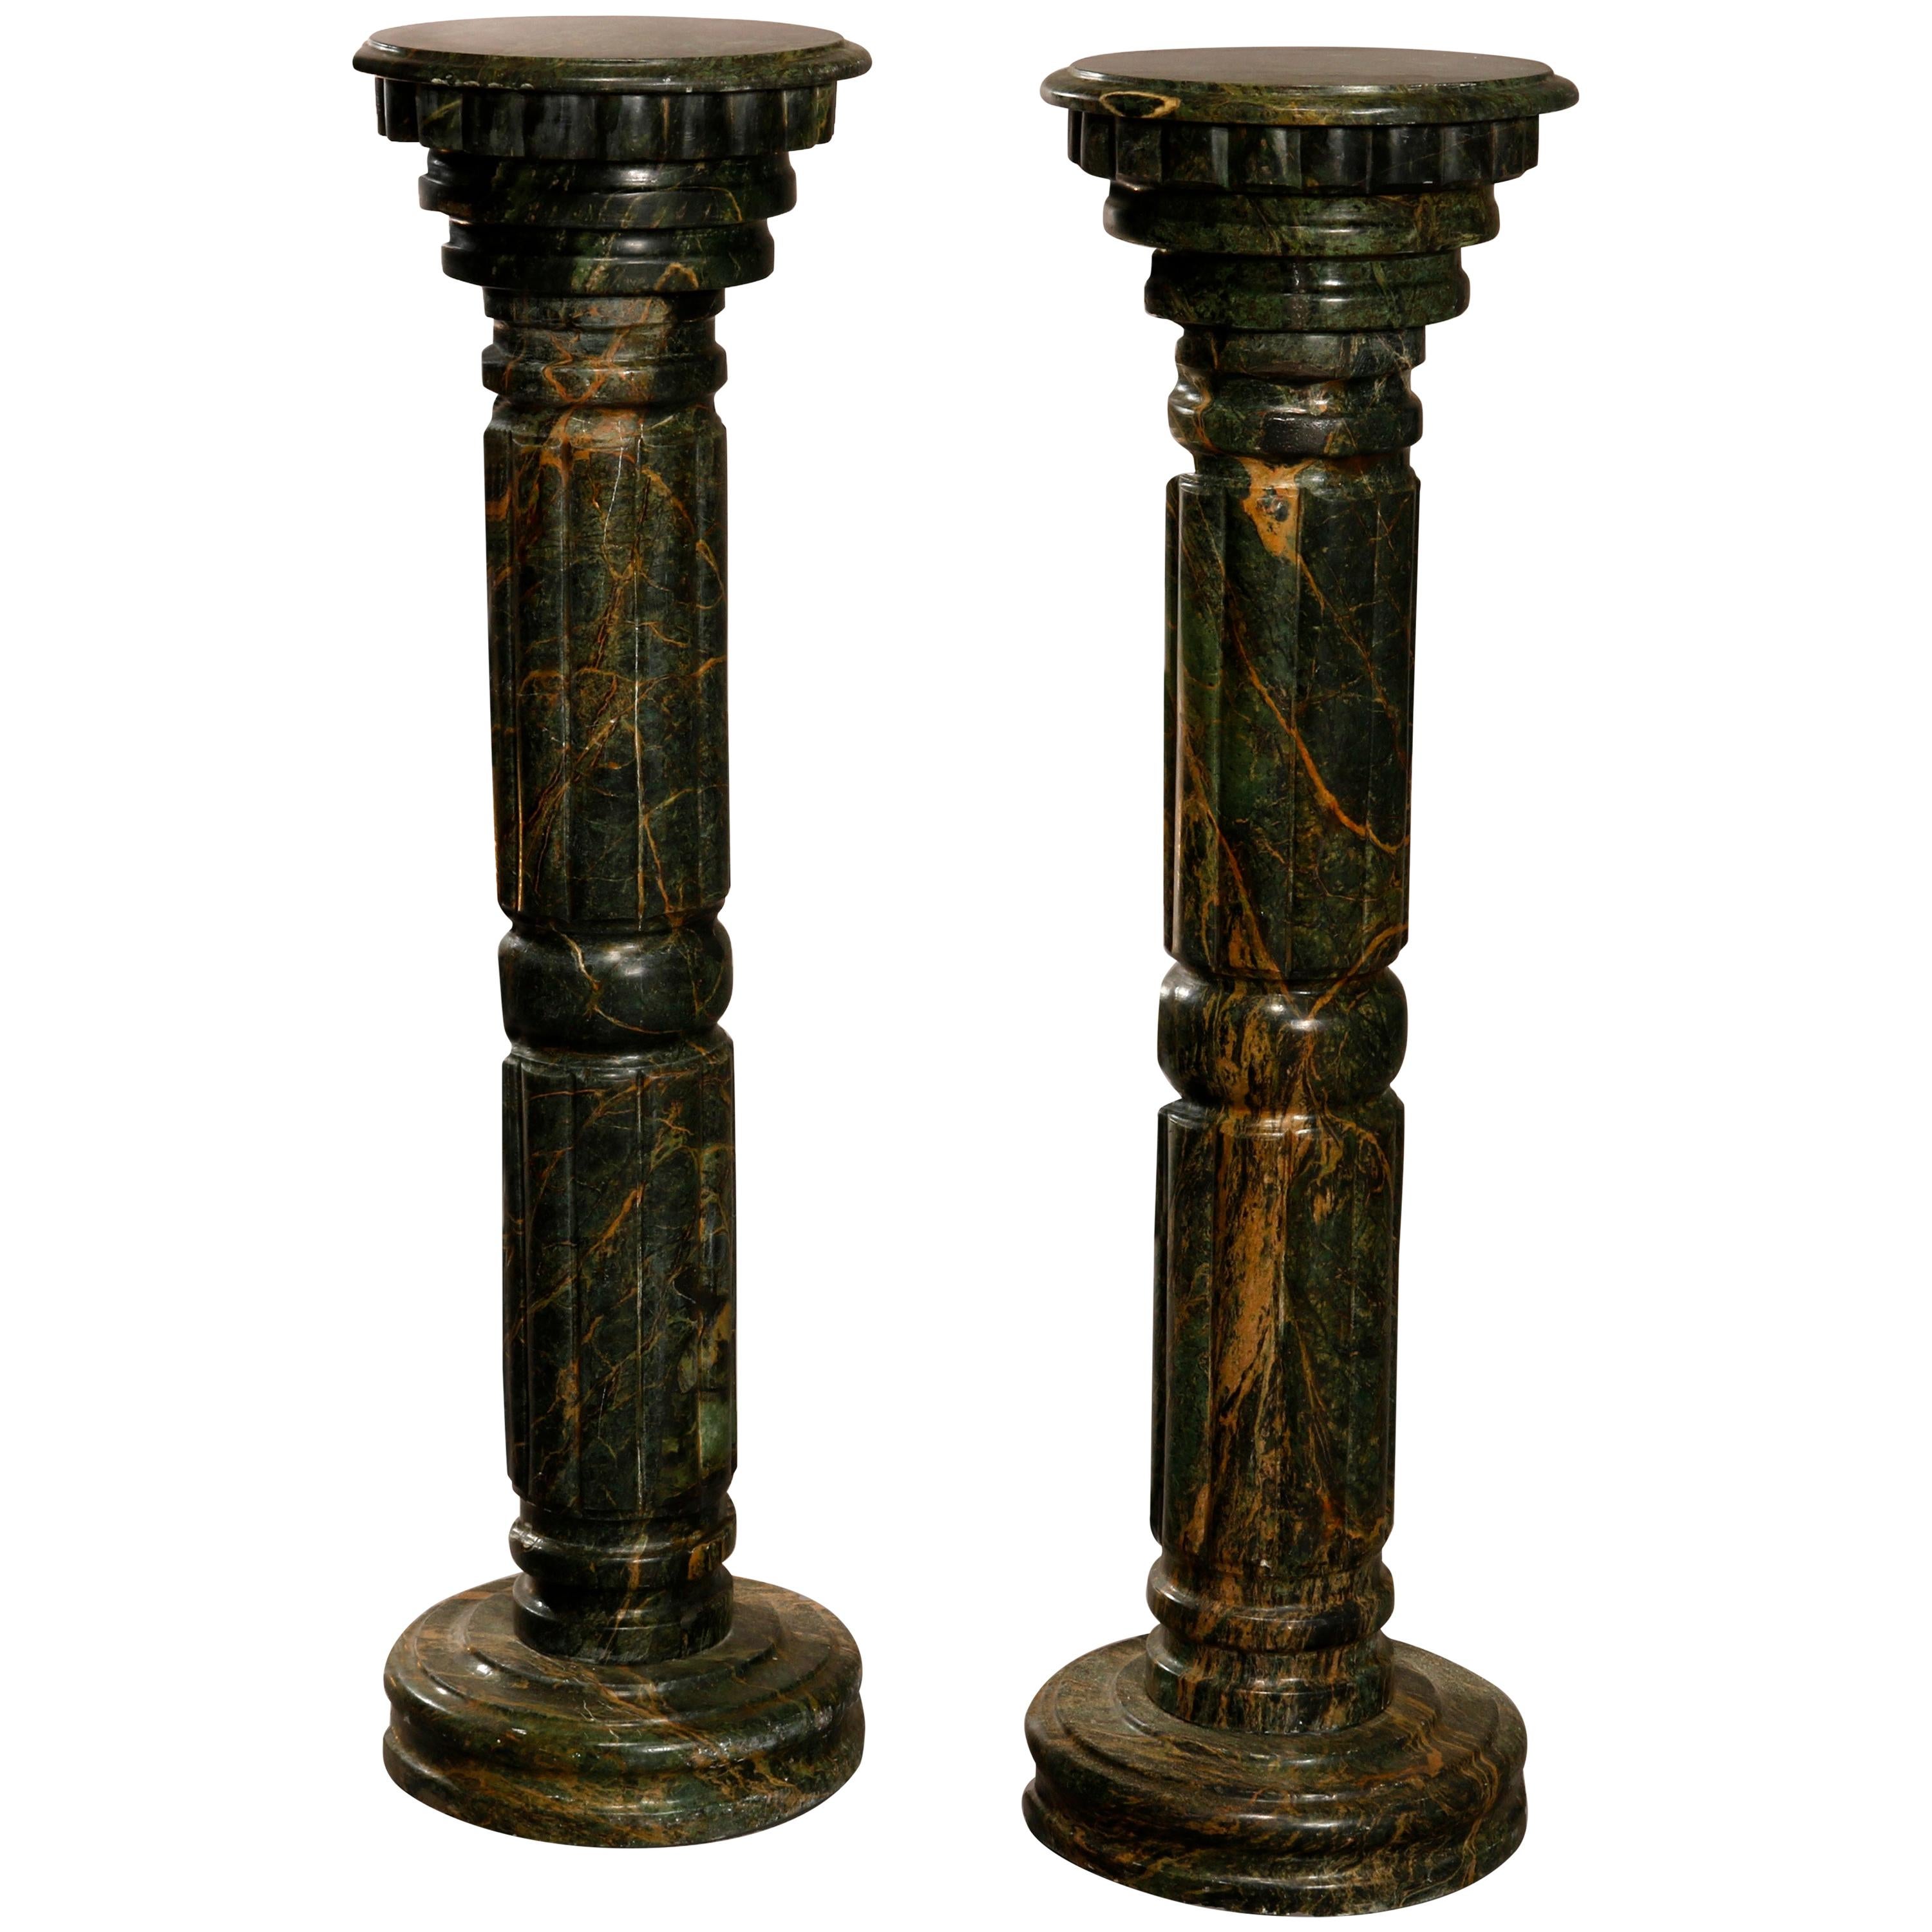 Pair of Italian Malachite Green Carved Marble Sculpture Display Pedestals